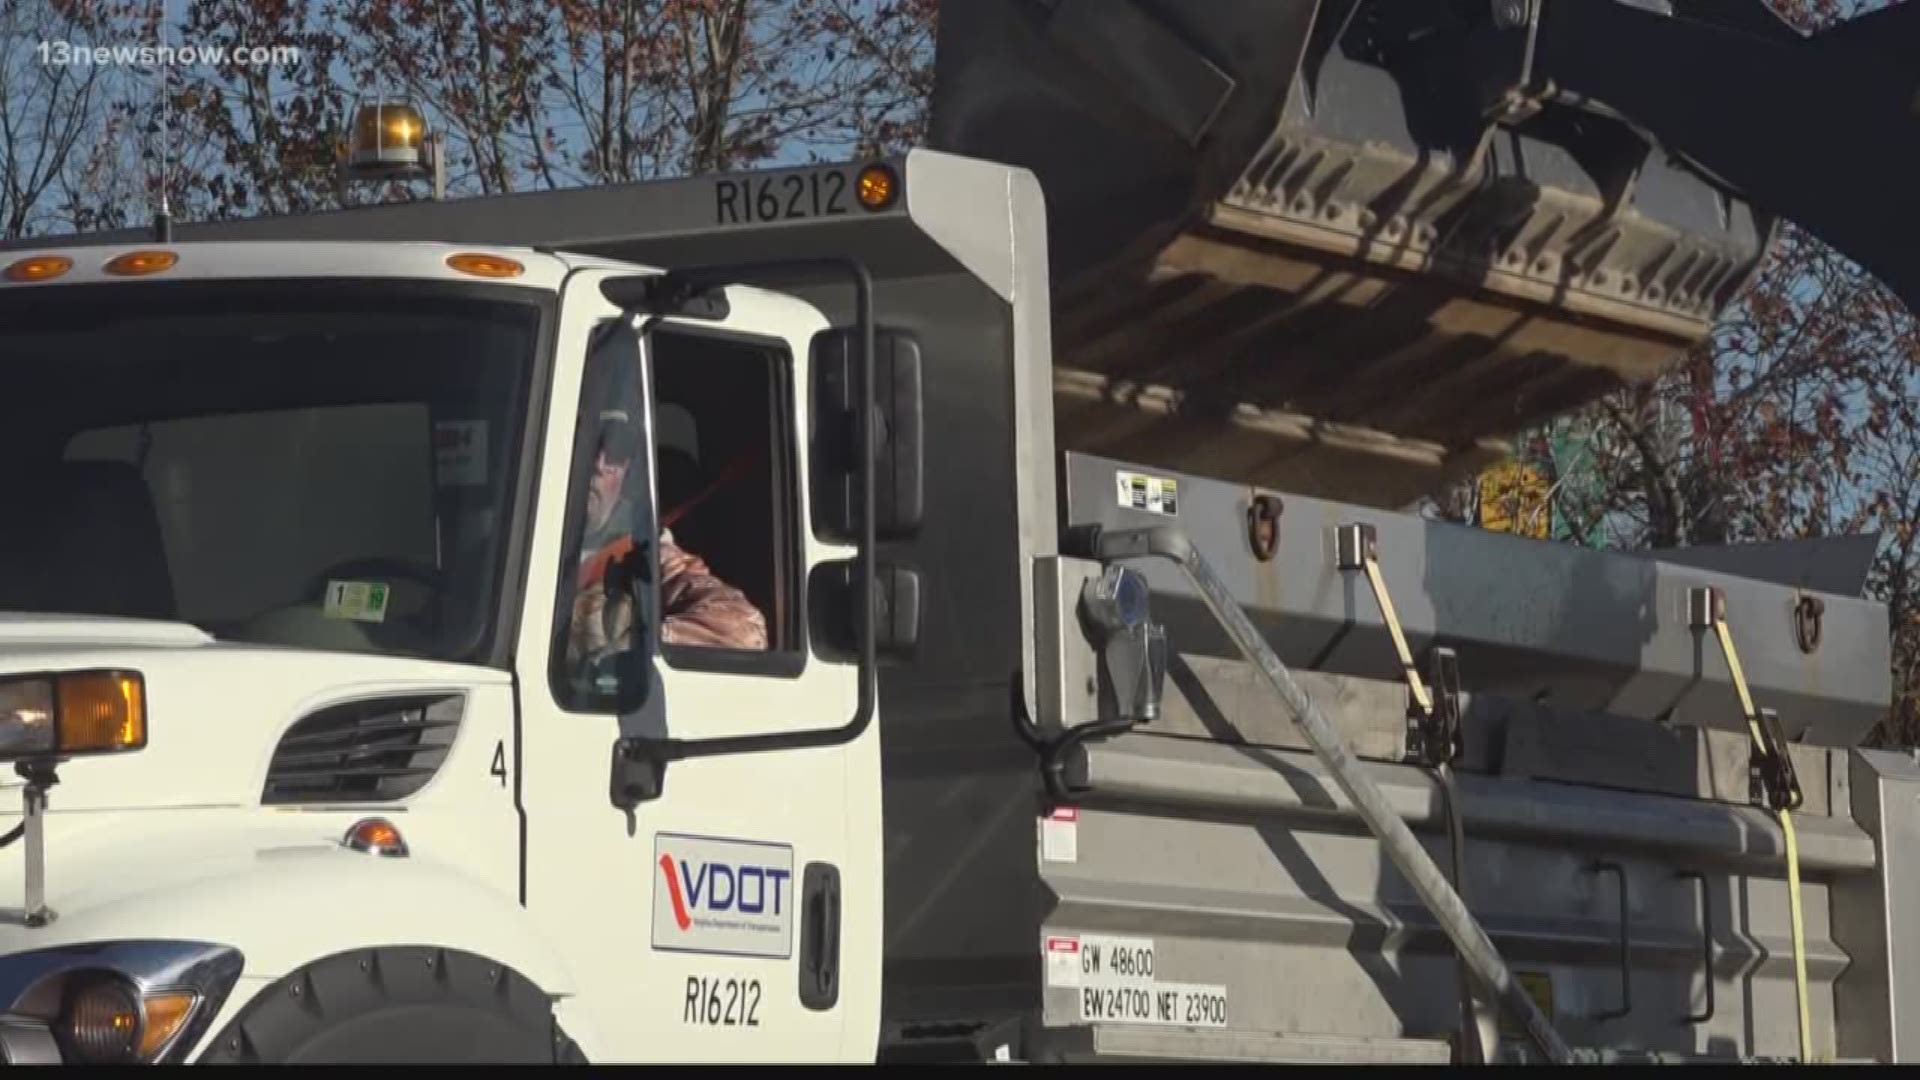 VDOT is ready to get its snow plows out once it snows this winter.